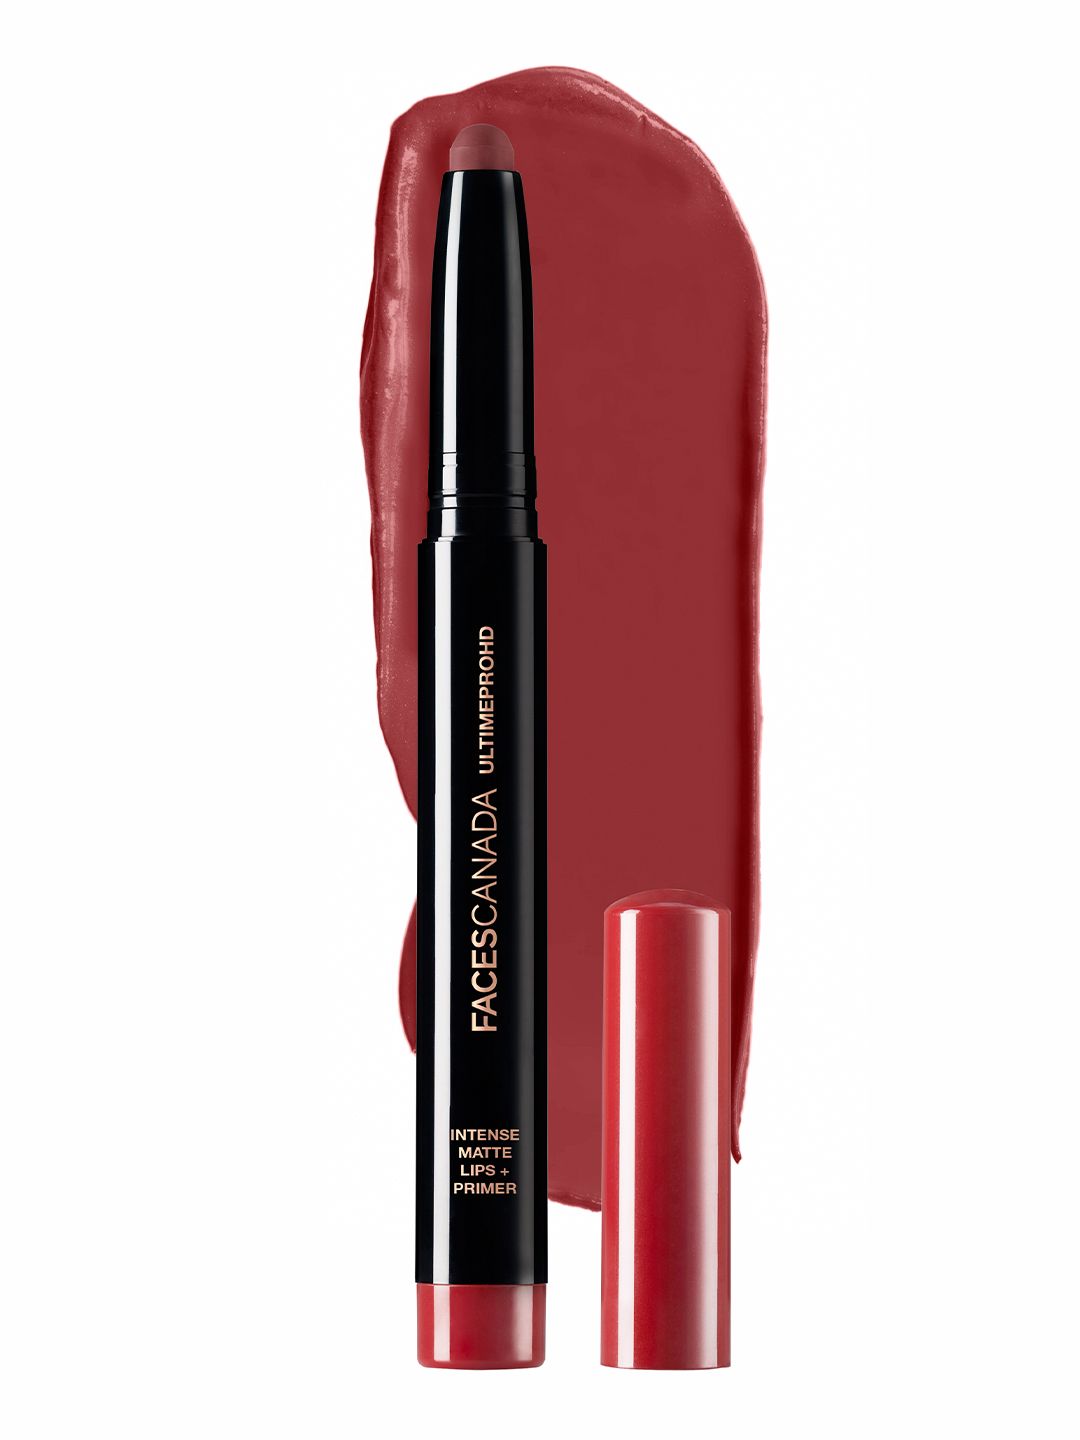 FACES CANADA Ultimepro Hd Intense Matte Lips + Primer Crushed Berry  04 1.4gm Price in India